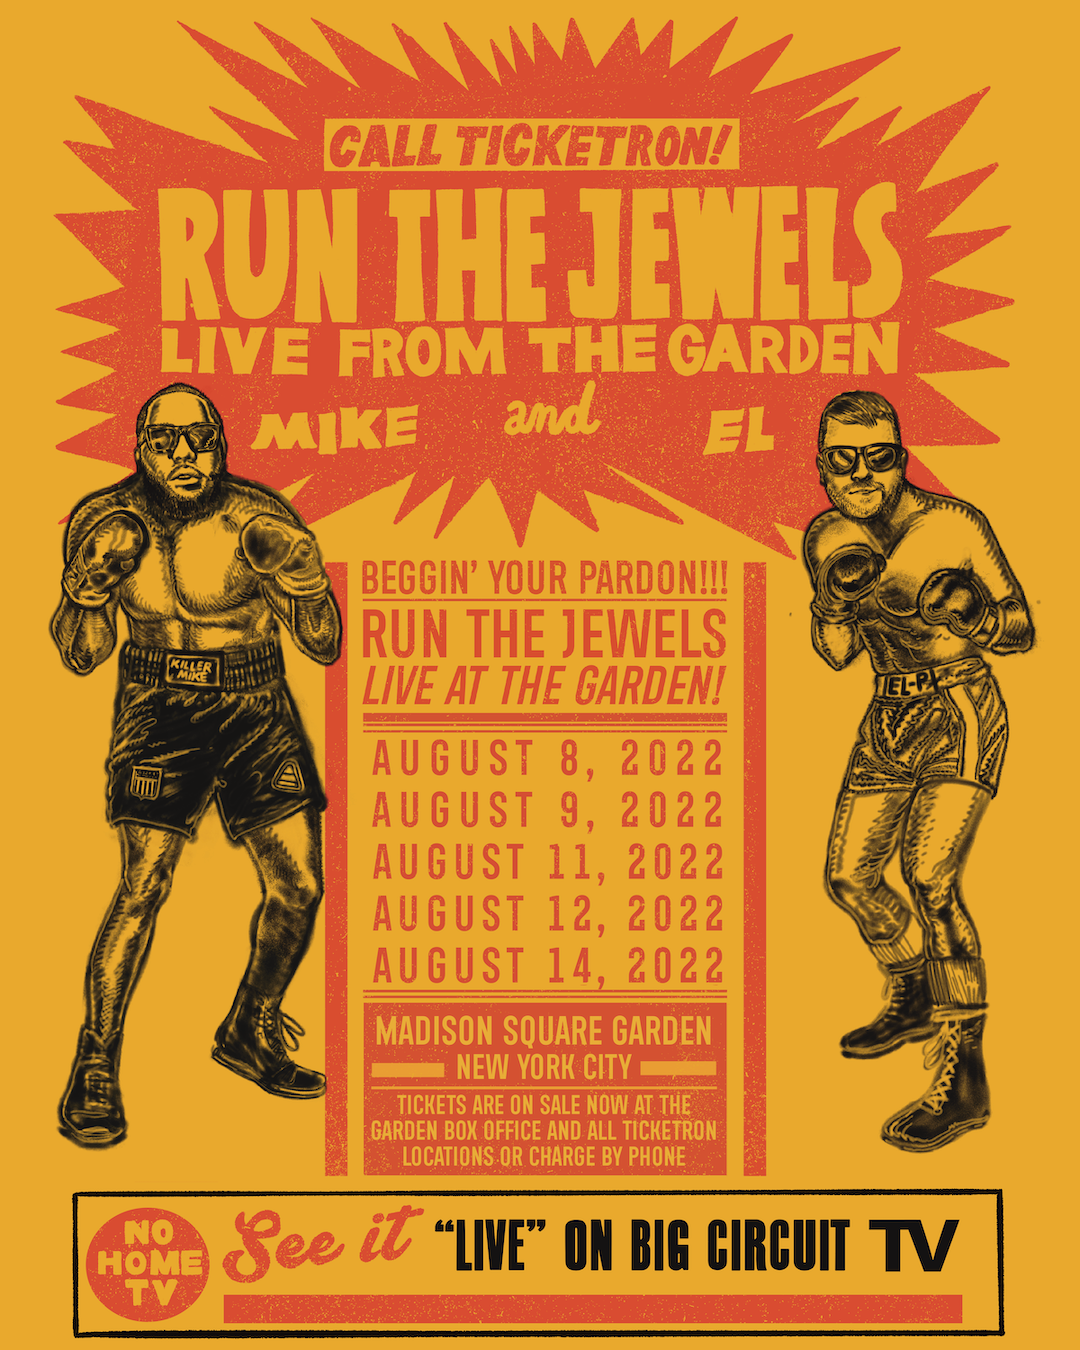 RUN THE JEWELS LIVE AT THE GARDEN THIS WEEK!